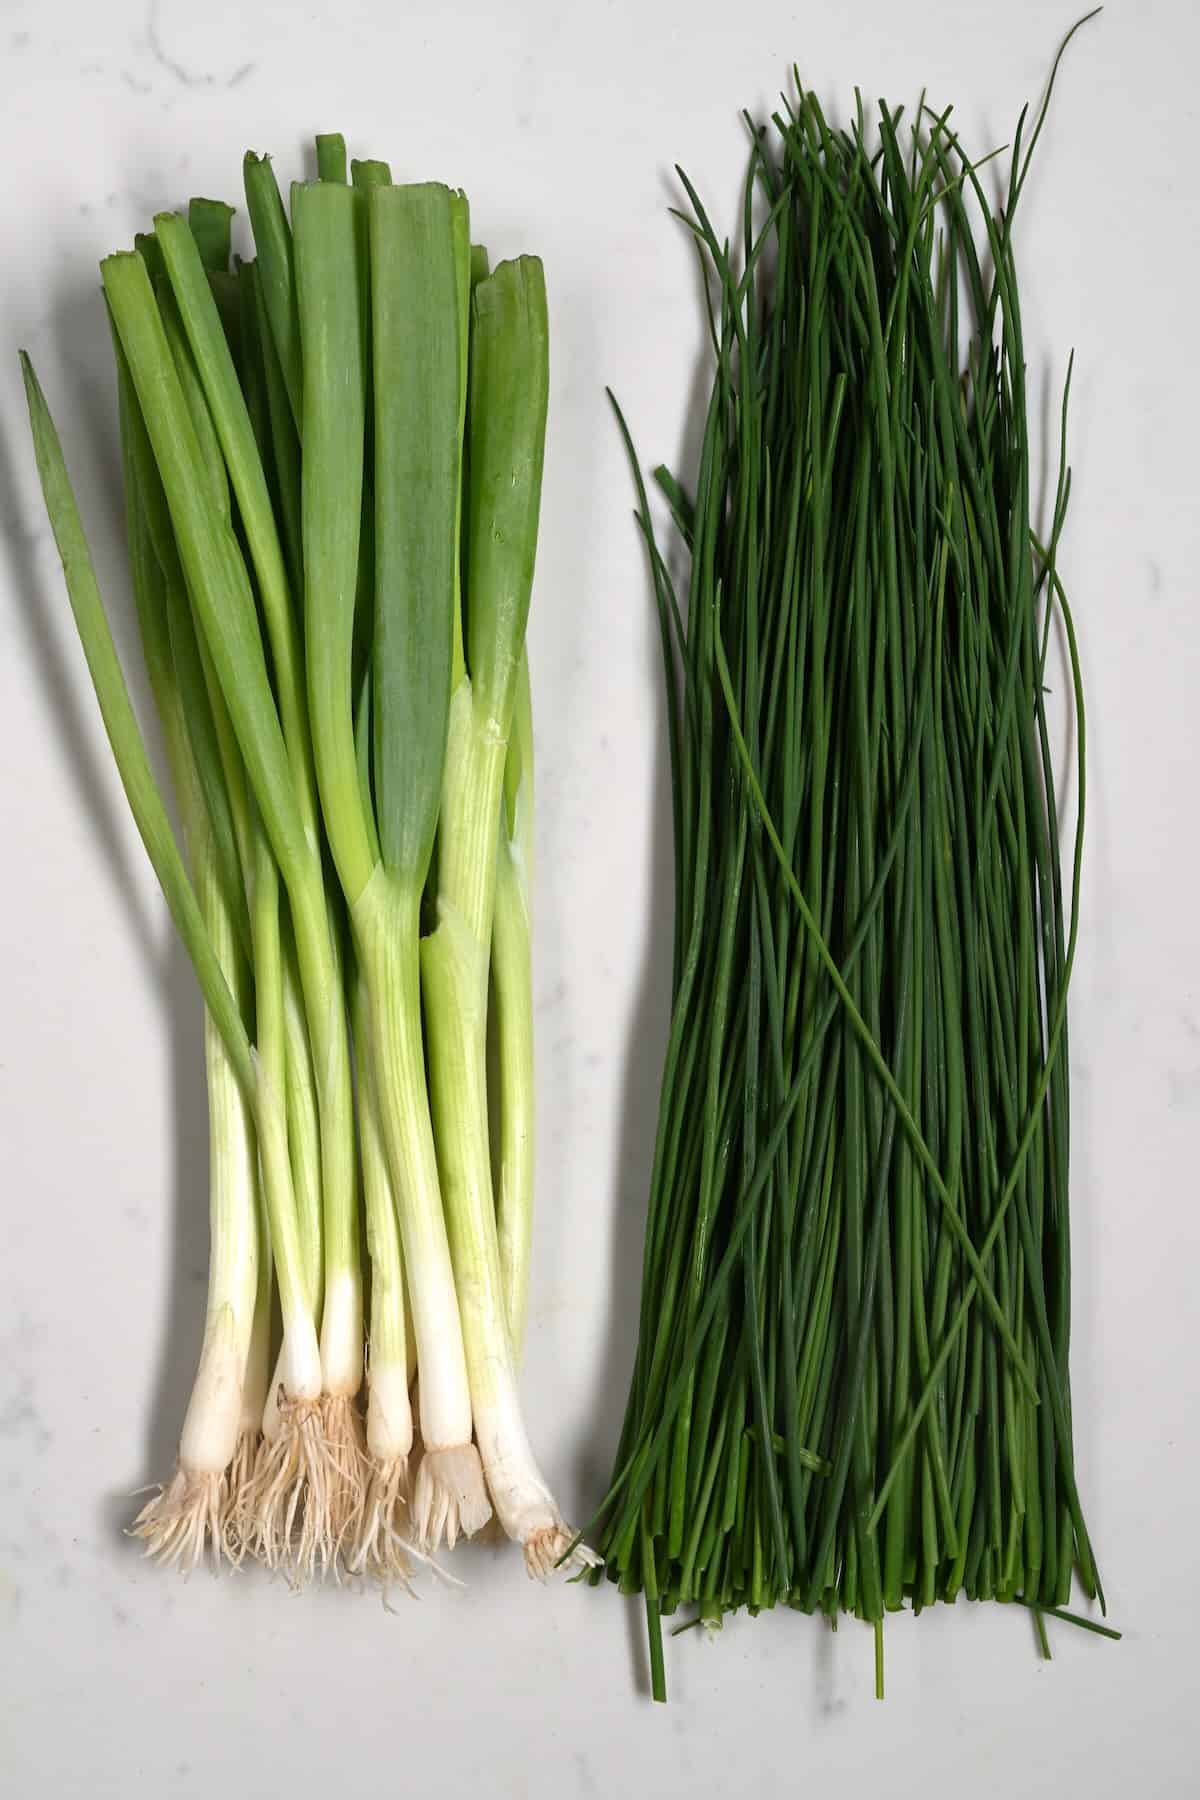 A bunch of green onions and chives on a flat surface